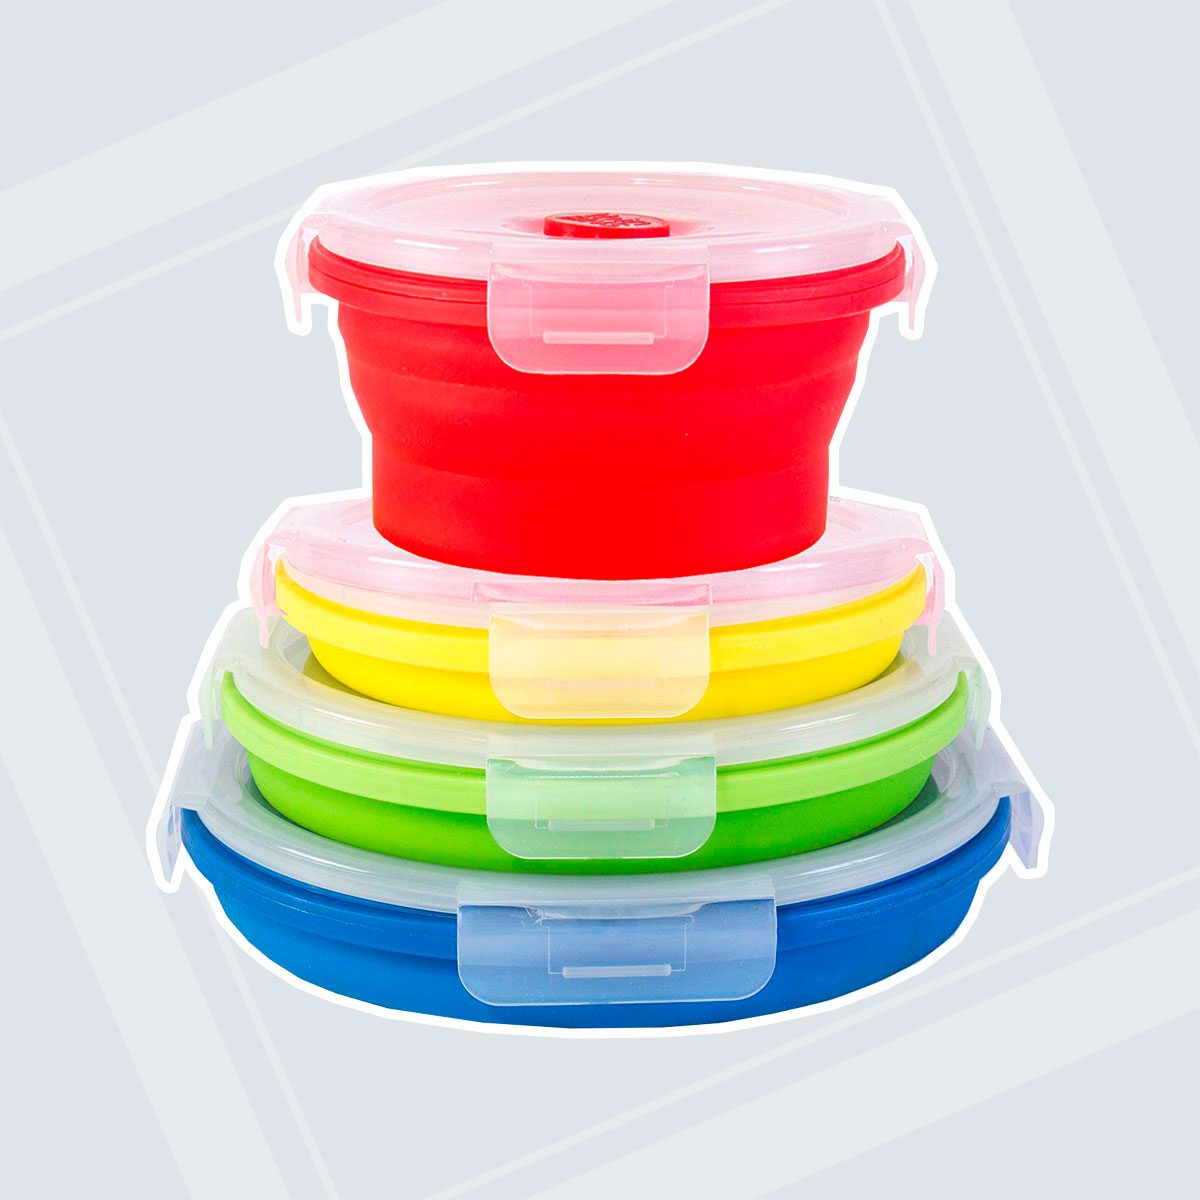 Camping Food Containers